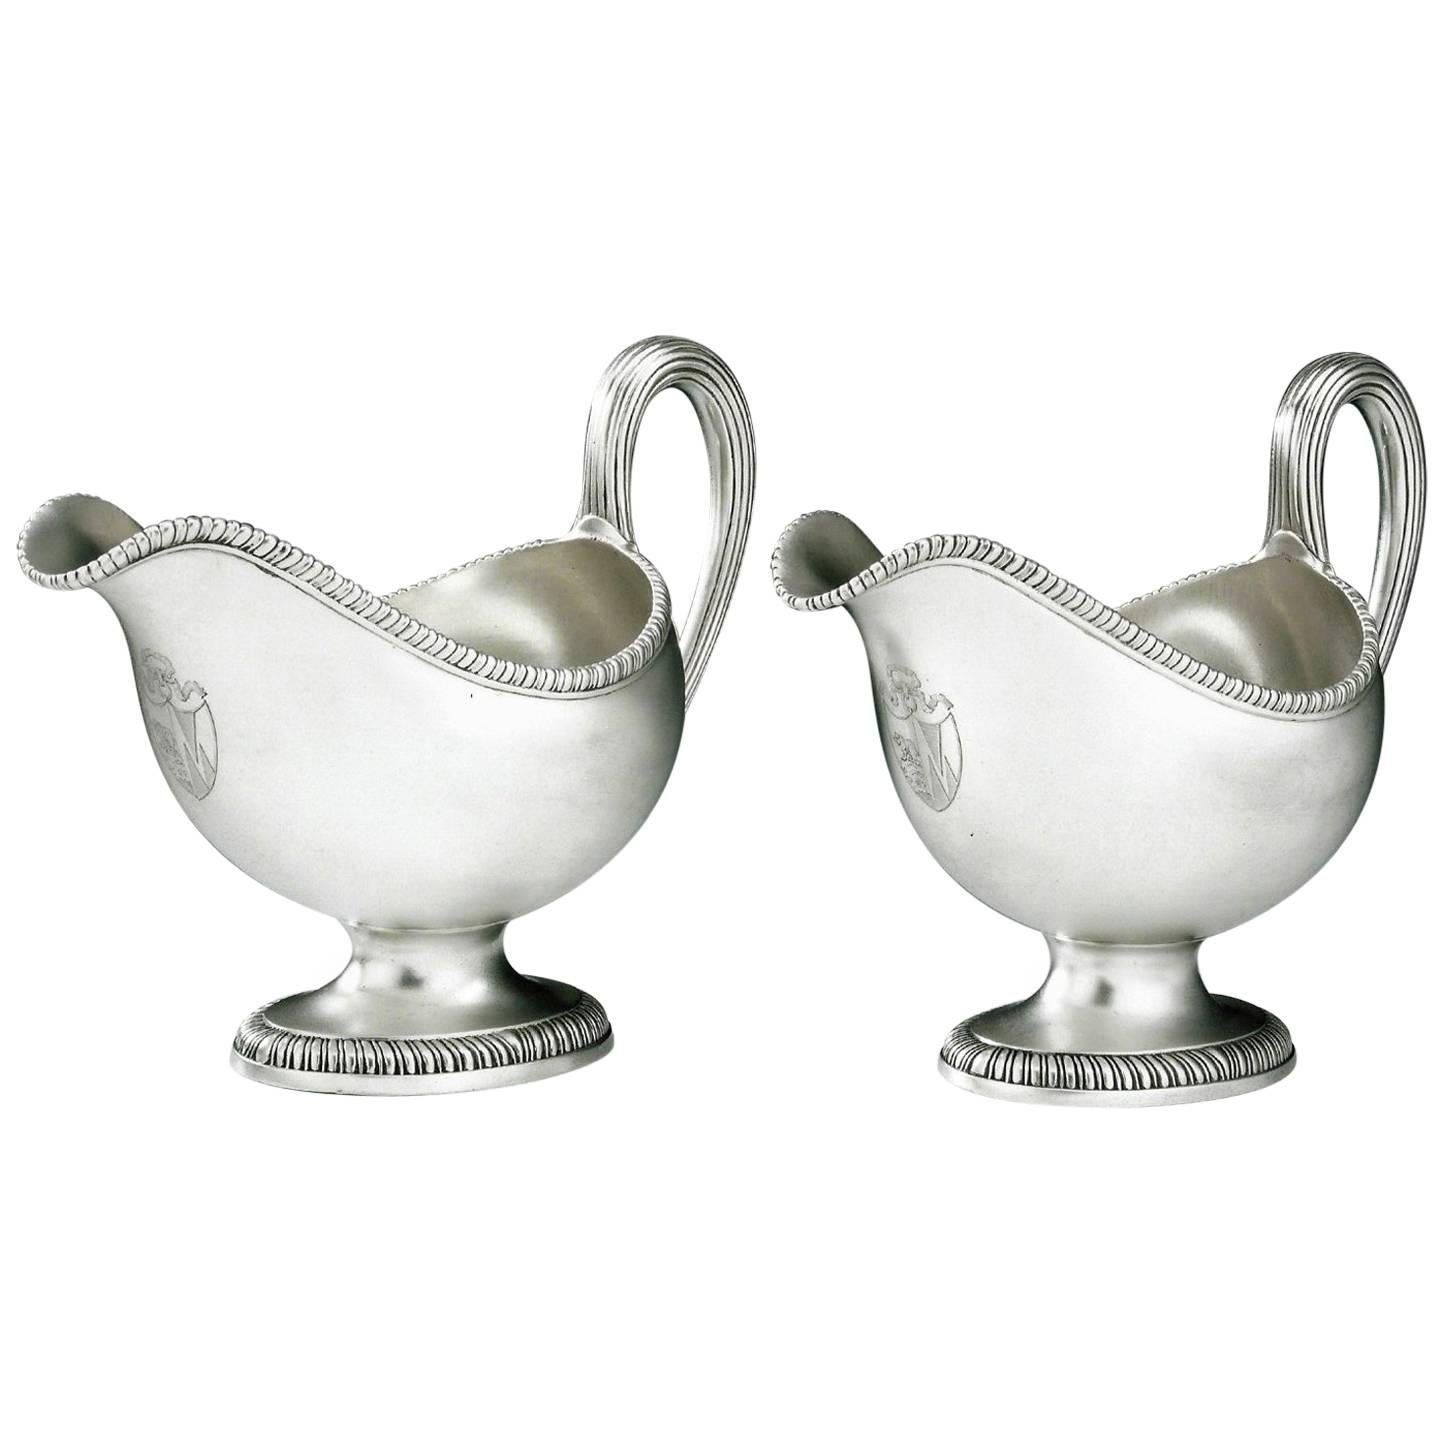 Outstanding Pair of George III Sauceboats Made by Parker & Wakelin